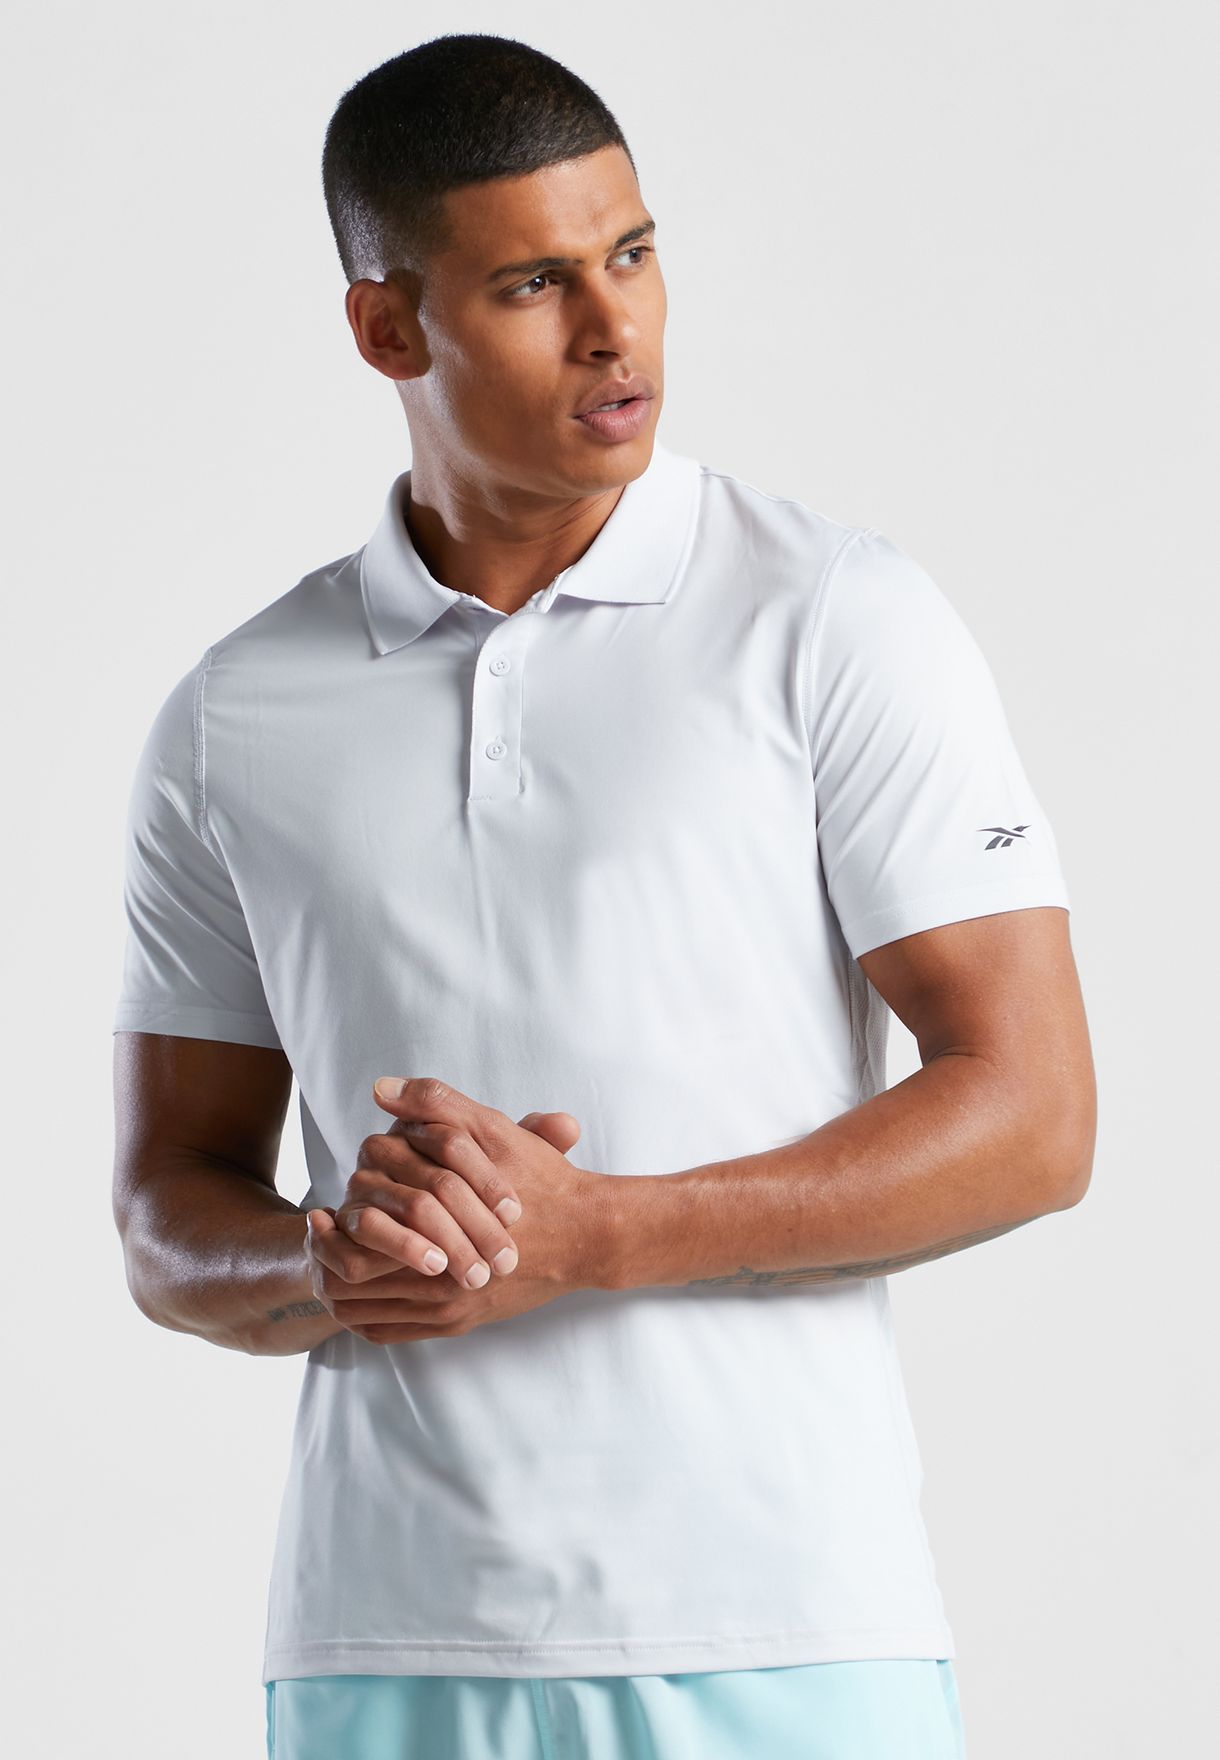 Reebok Mens Workout Ready Recycled Polo